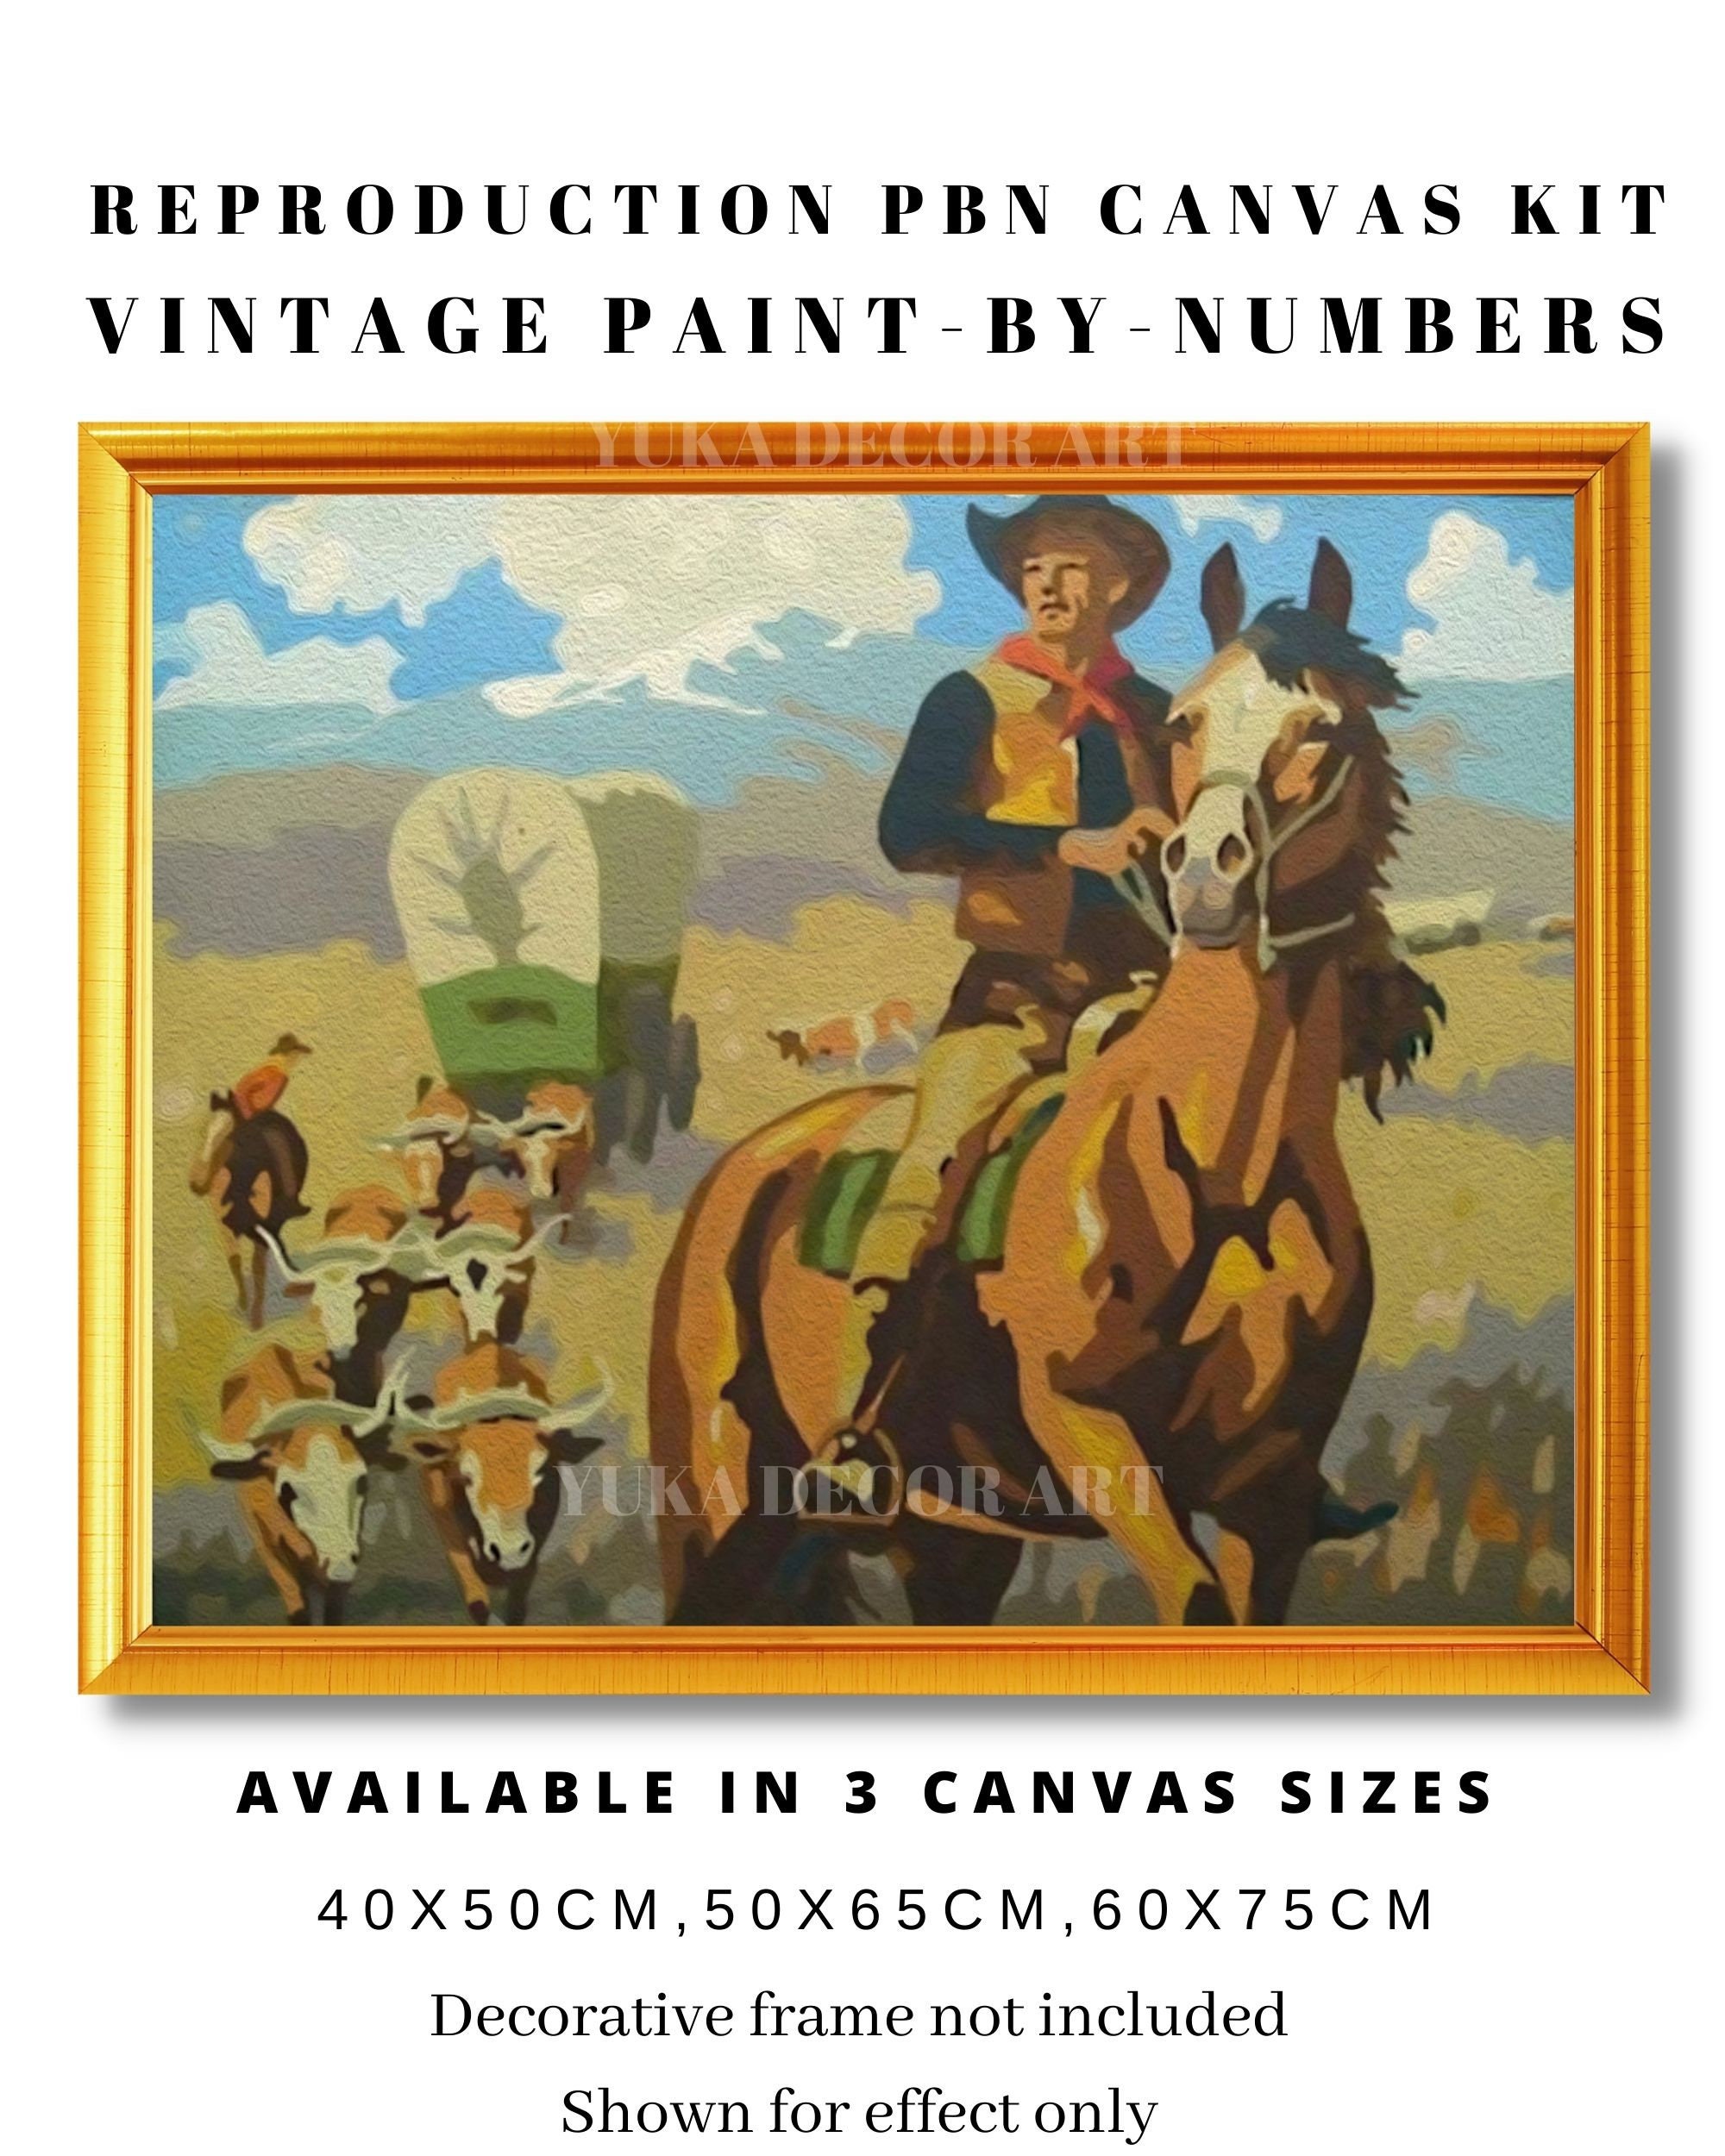 Vintage Inspired PAINT by NUMBER Kit Adult Desert Travelling Cowboy Painting  Easy Beginner Acrylic Painting DIY Vintage Style Decor Gift Dad 